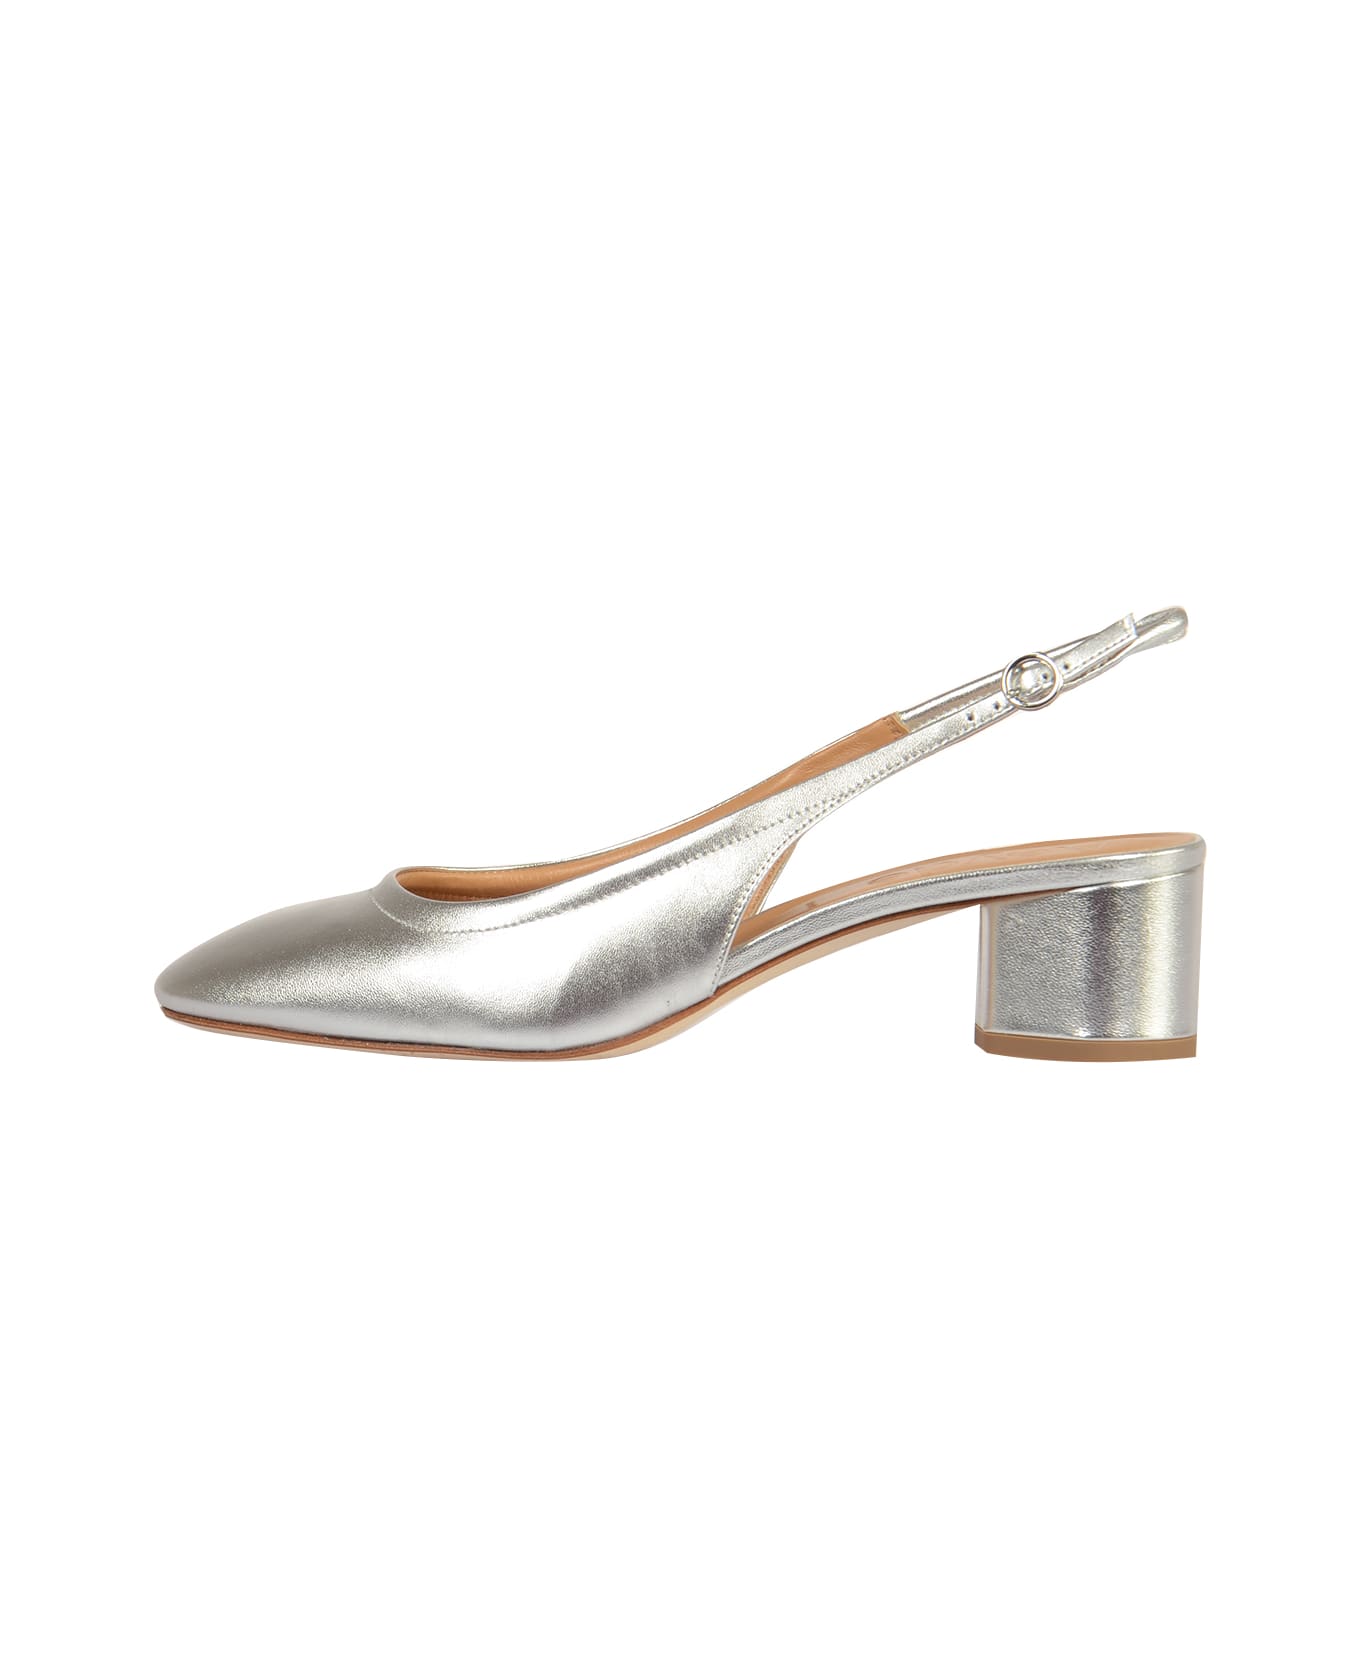 aeyde Romy Laminated Sandals - Silver ハイヒール